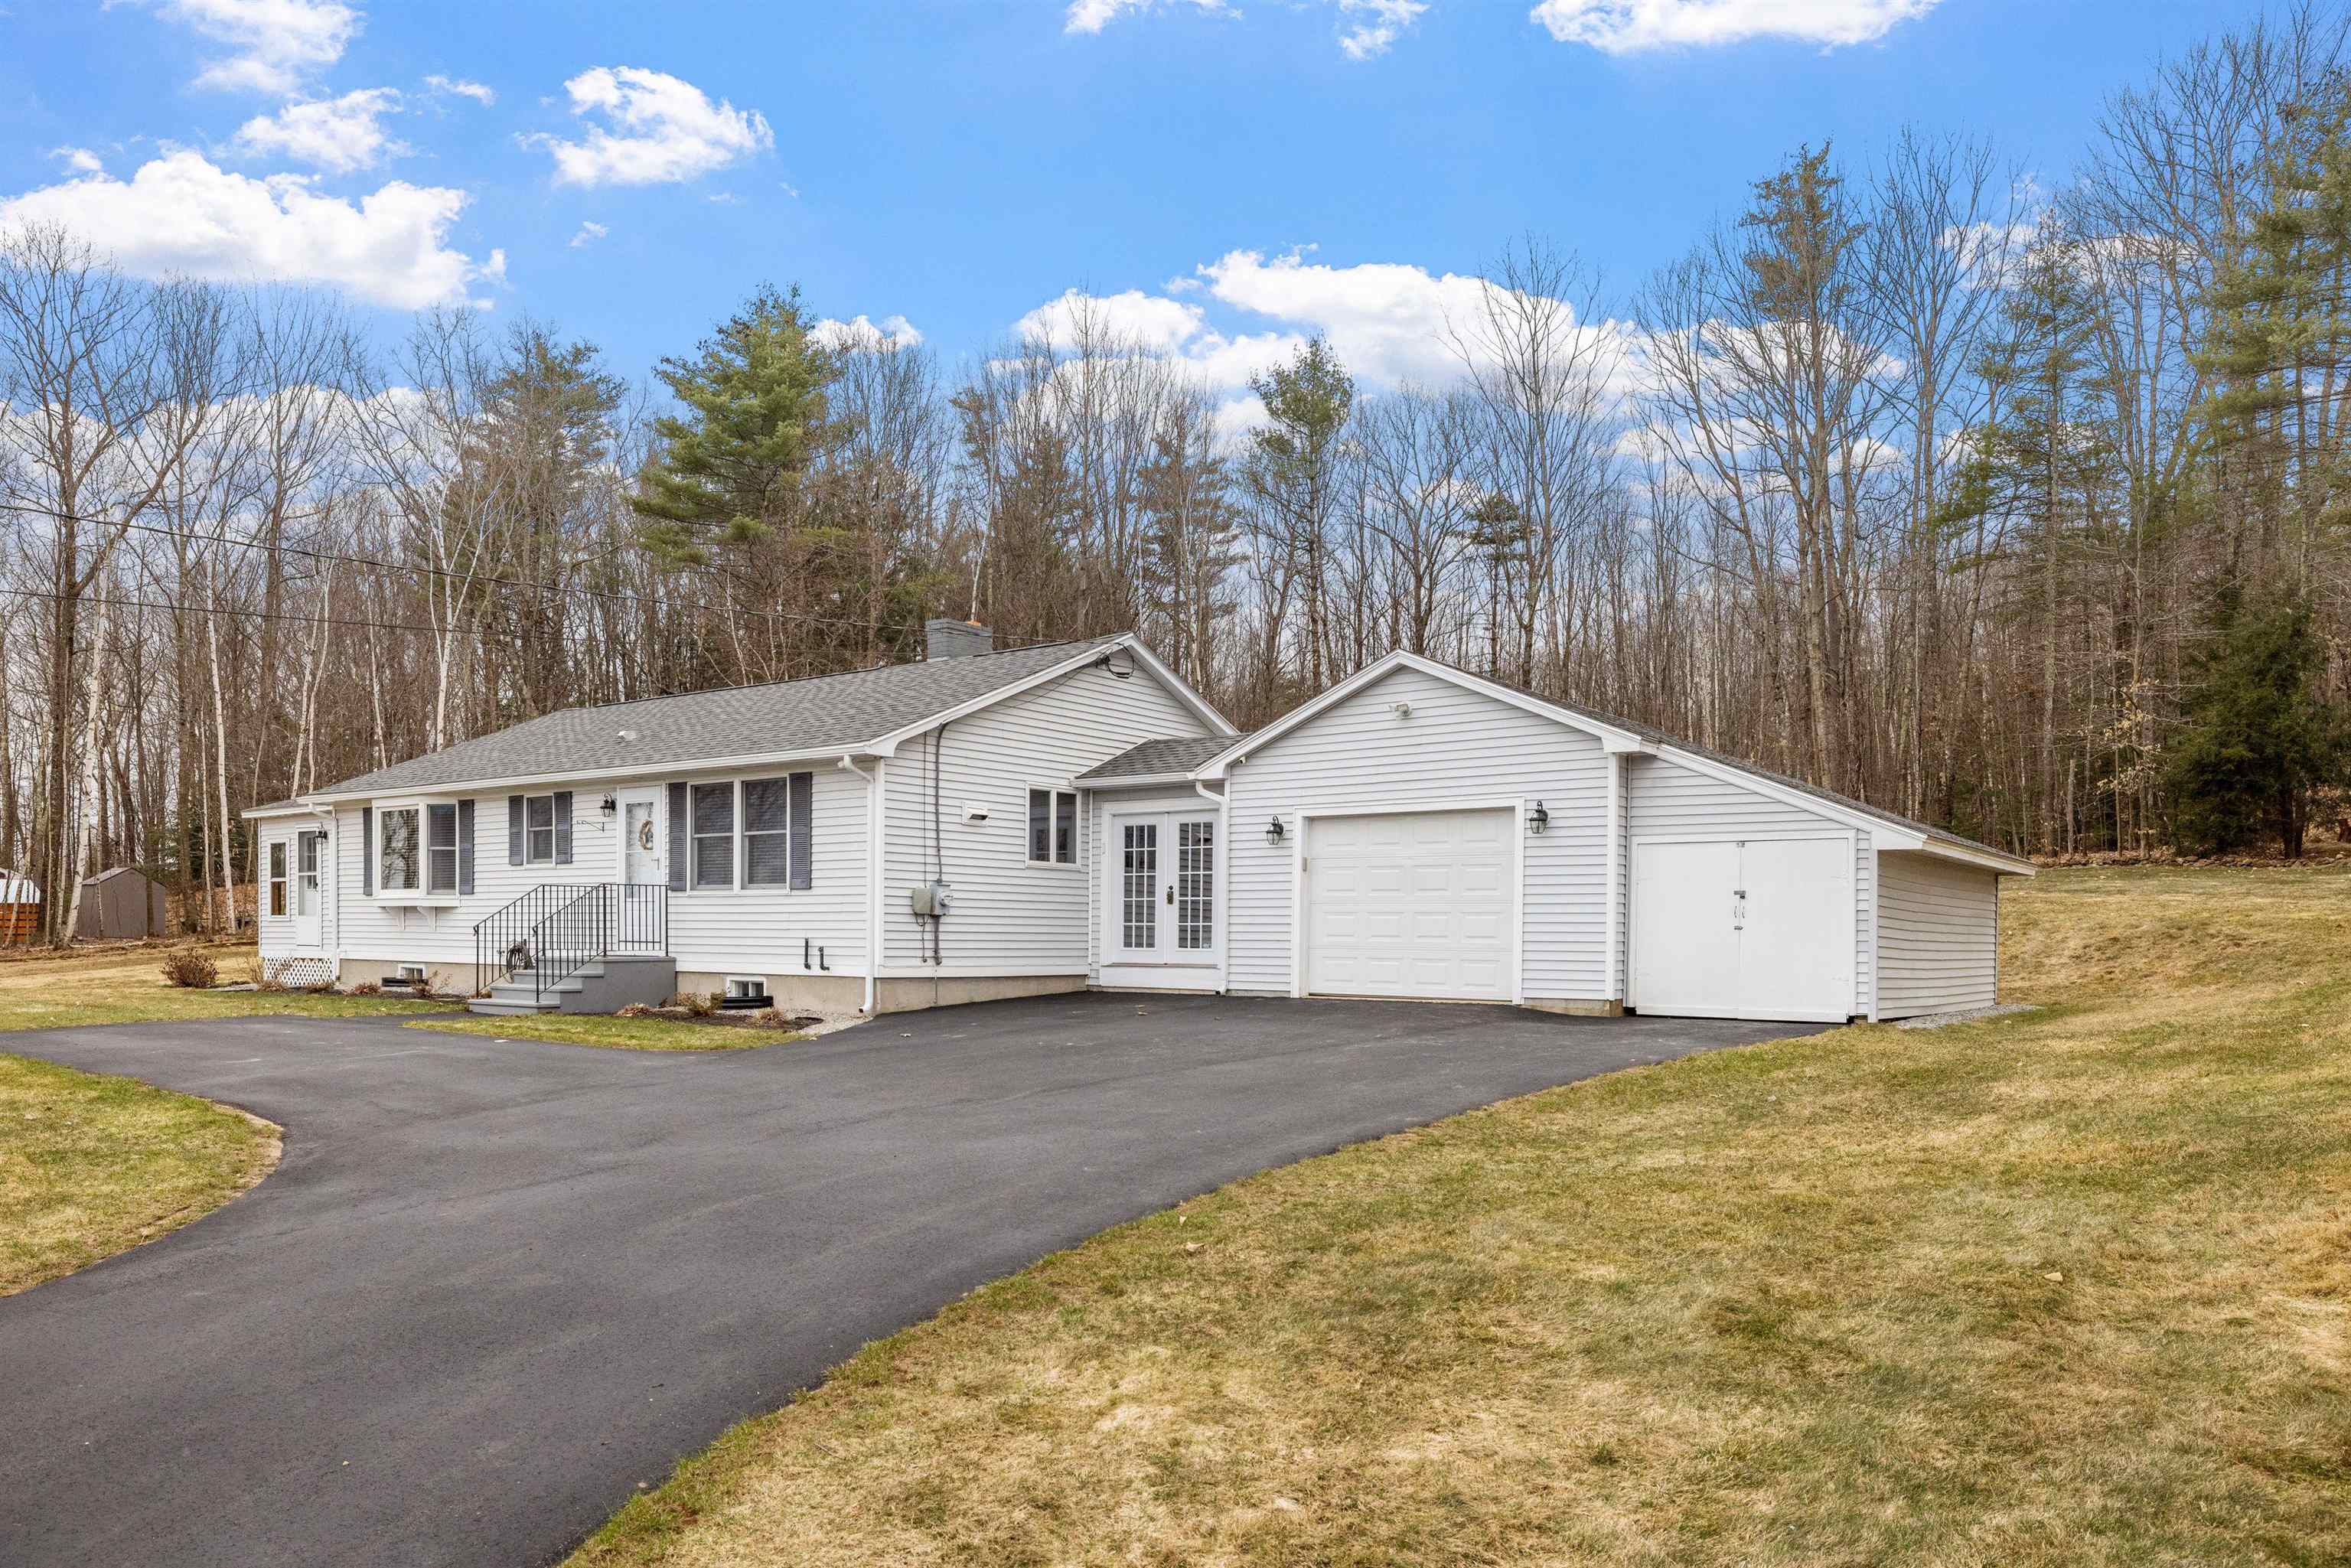 BOSCAWEN NH Homes for sale